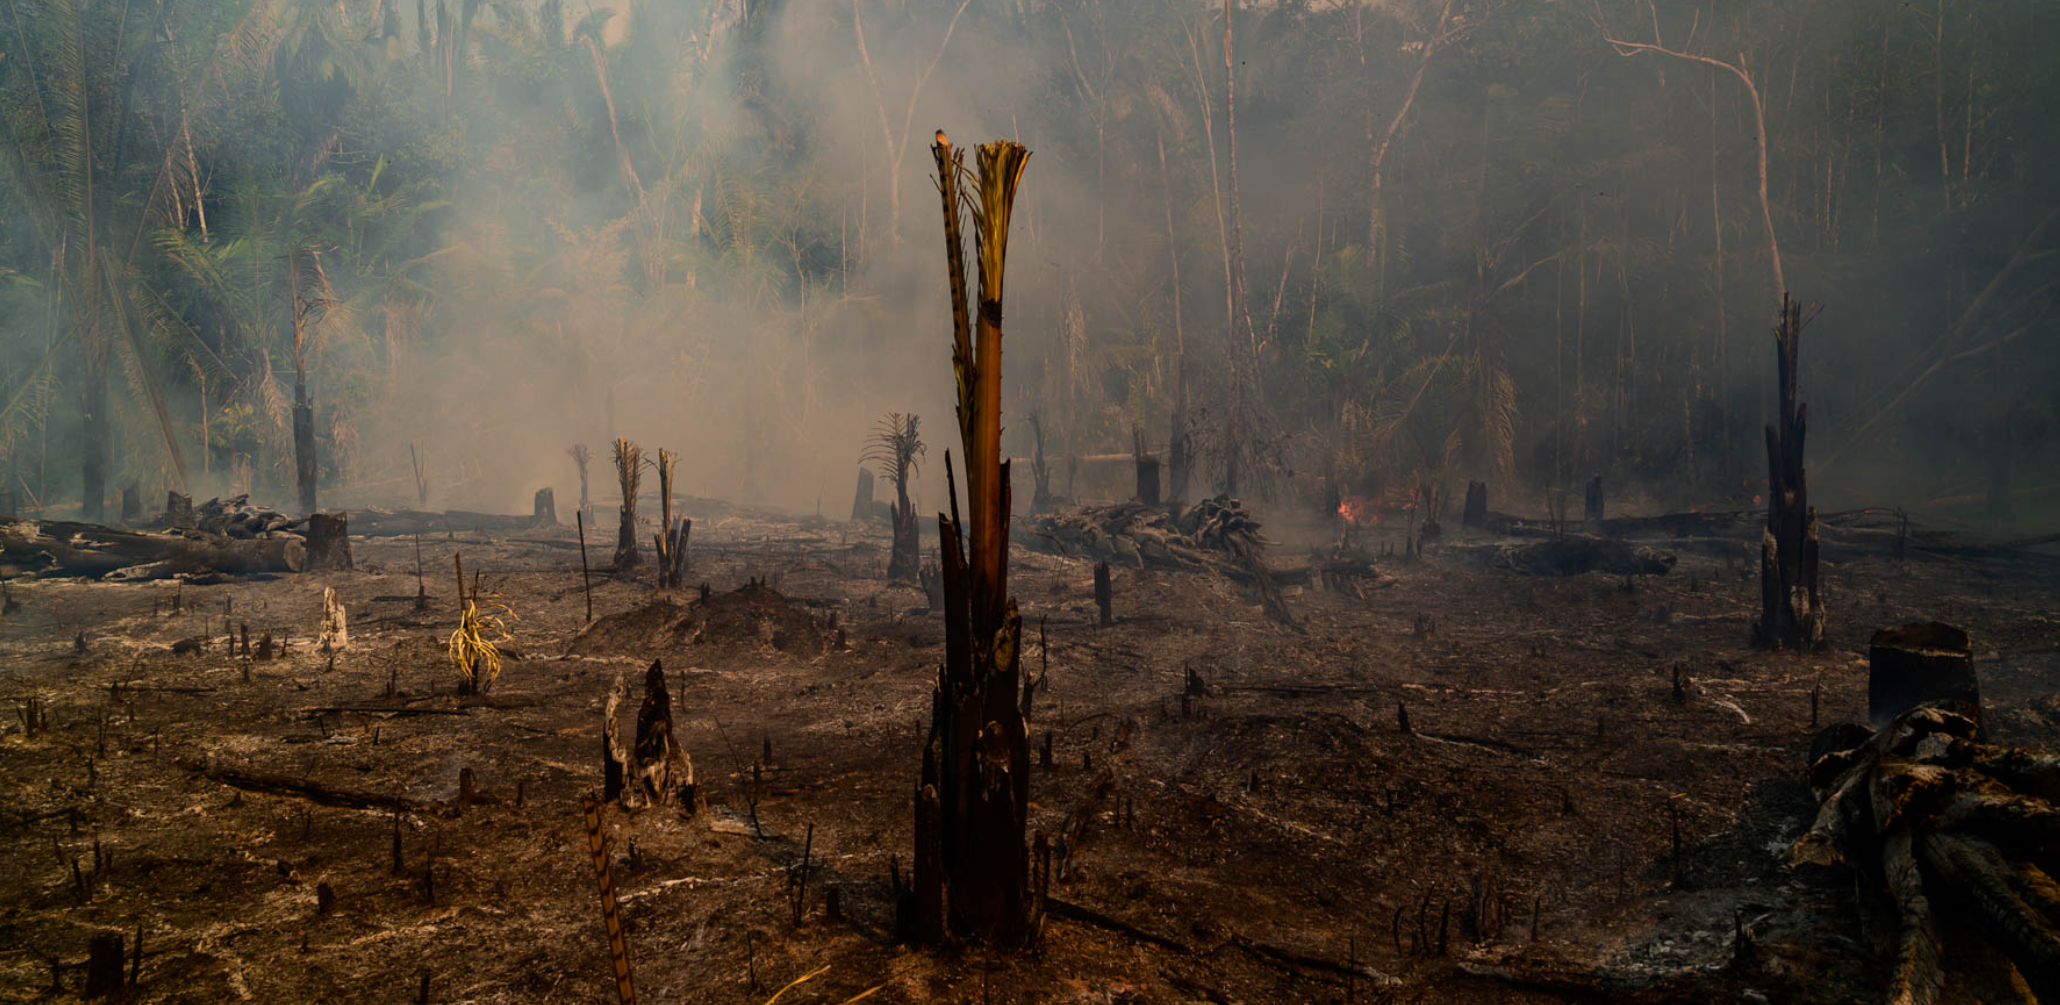 Accelerating Deforestation in the Amazon Rainforest Threatens Ongoing Climate Change Crisis